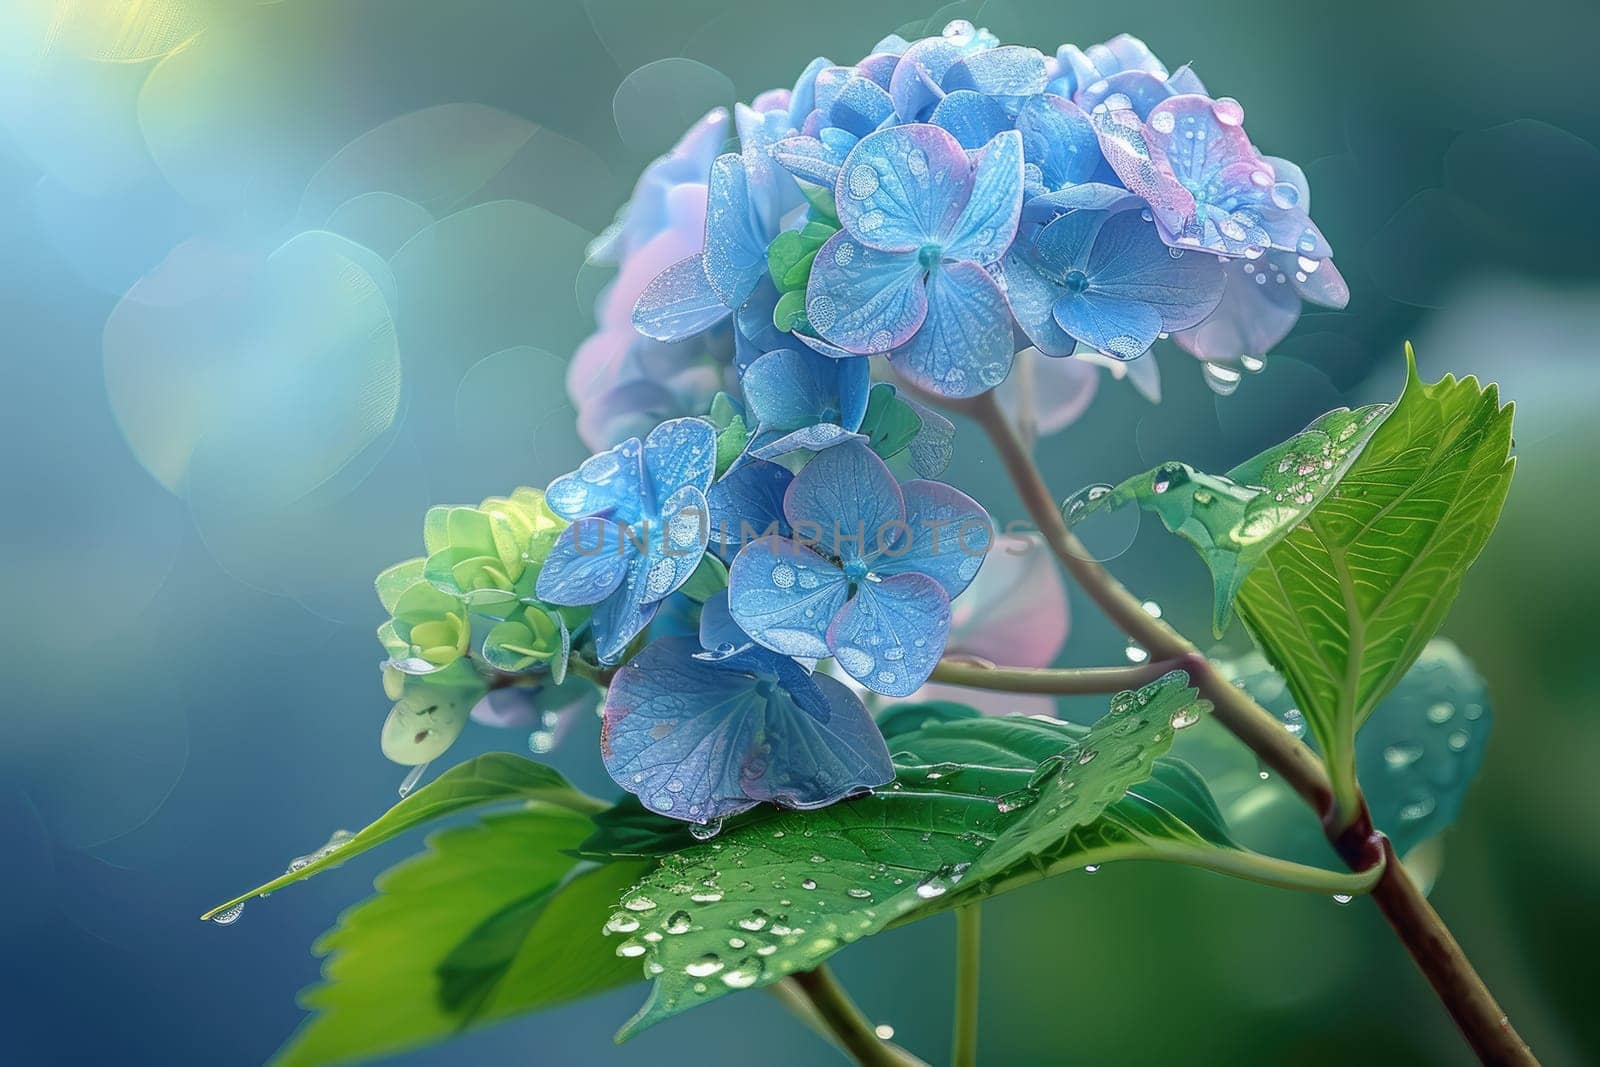 Close up view. Beautiful colors Hydrangea isolated with drops of water on the petals. by Chawagen